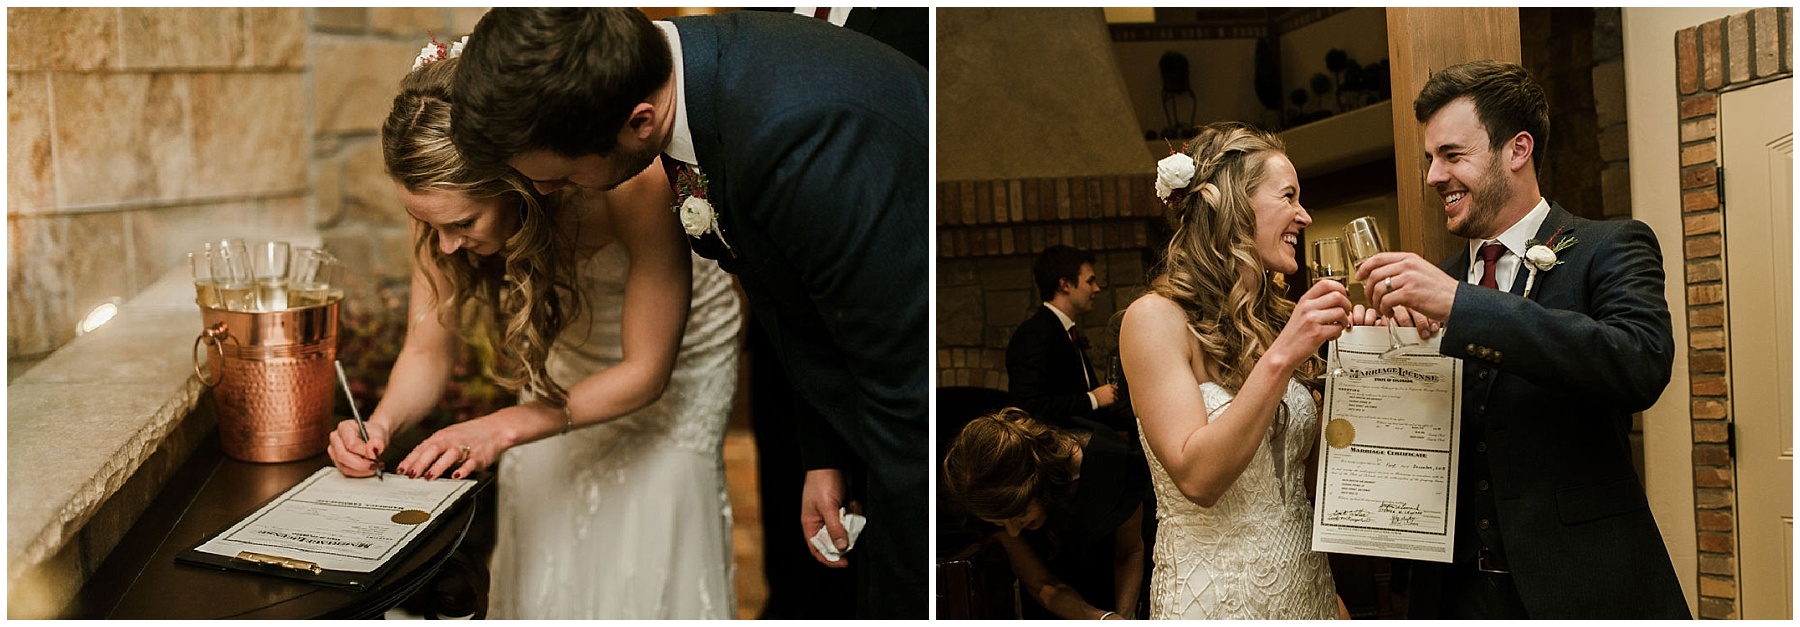 Katesalleyphotography-534_Haley and Dan get married in Estes Park.jpg